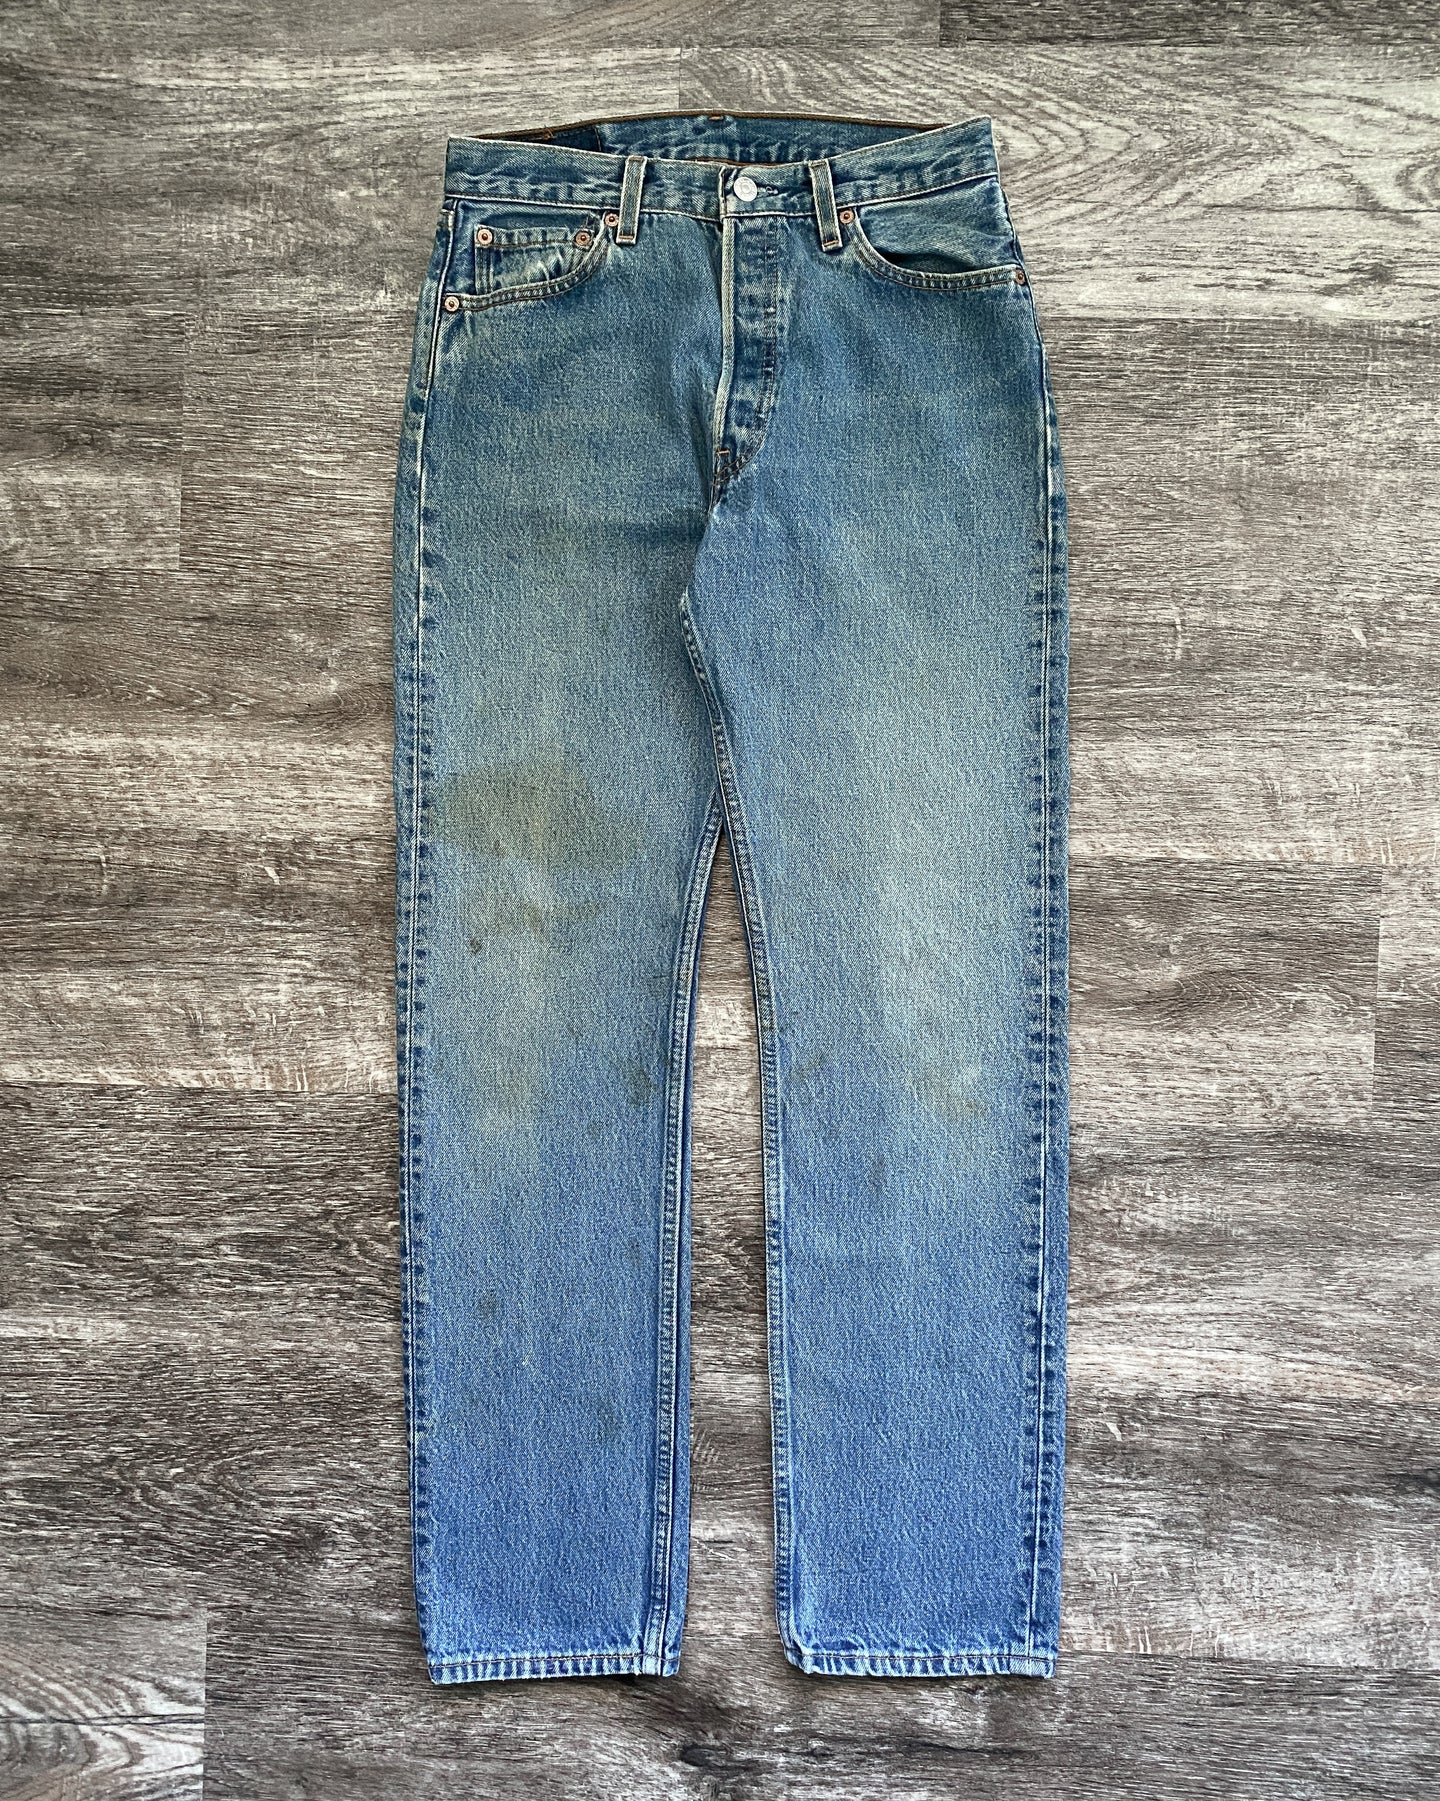 1990s Levi's Well Worn Dirt Wash 501 - Size 29 x 31